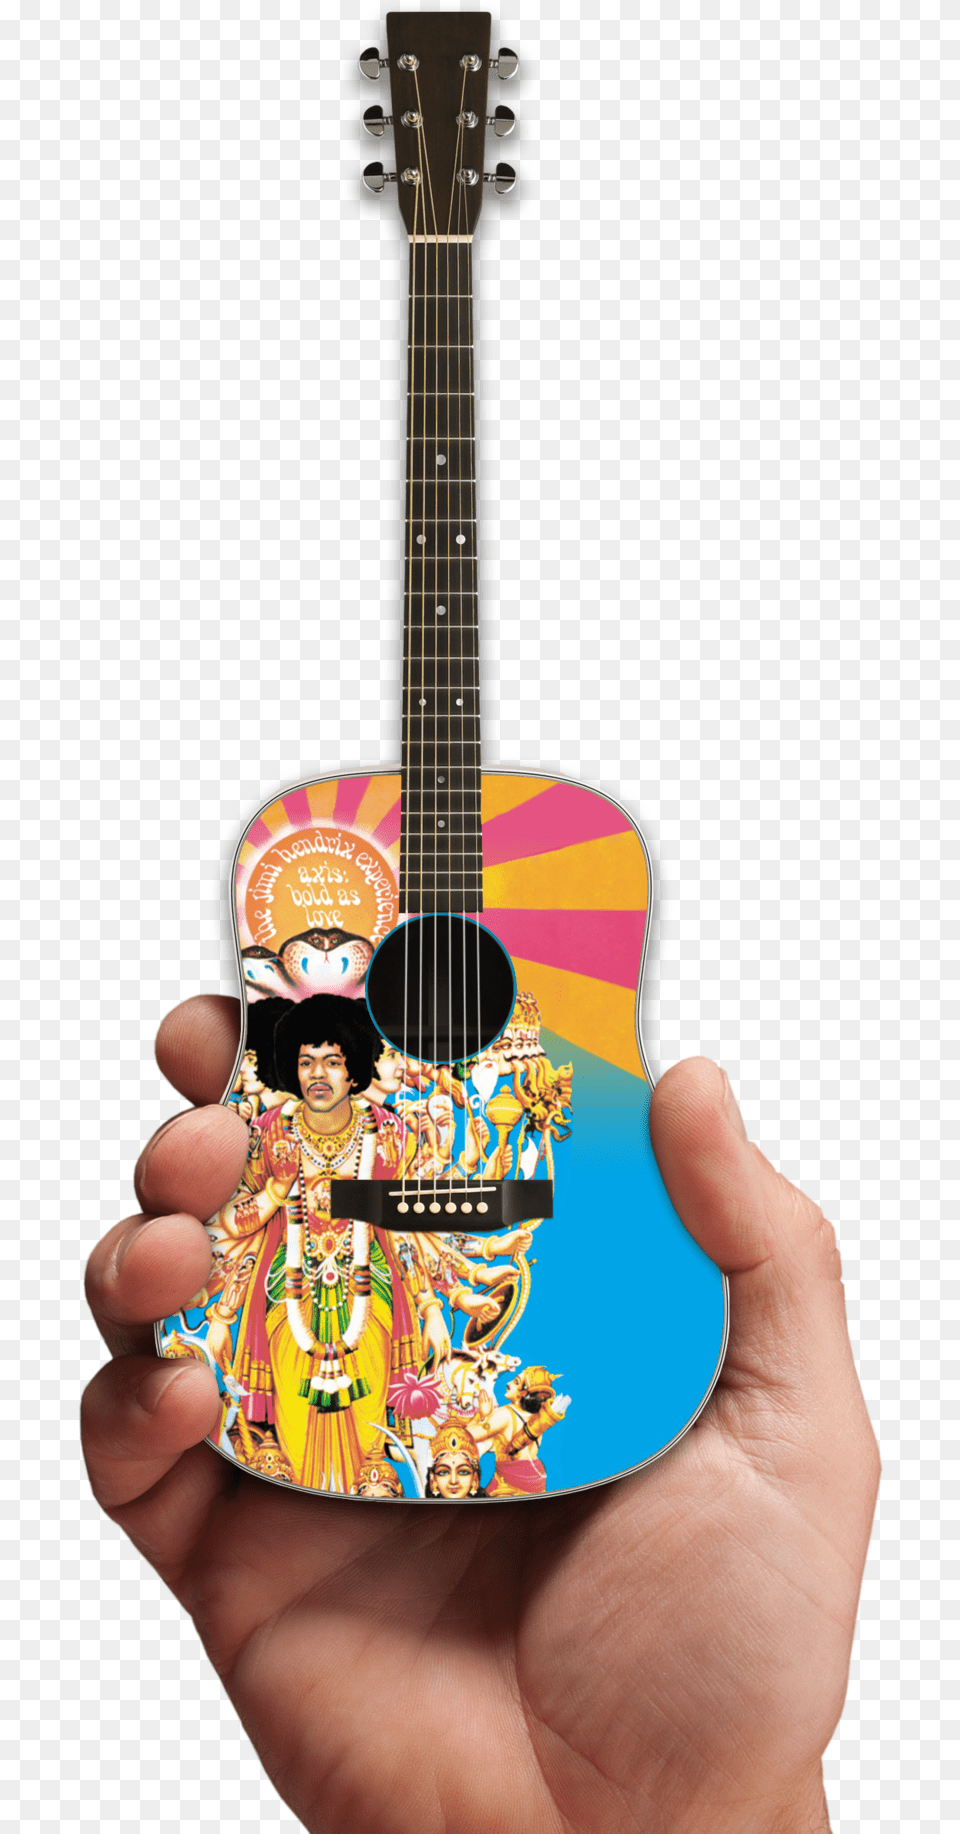 Axe Heaven Jimi Hendrix Axis Bold As Love Mini Acoustic Miniature Guitar, Musical Instrument, Adult, Wedding, Person Free Transparent Png